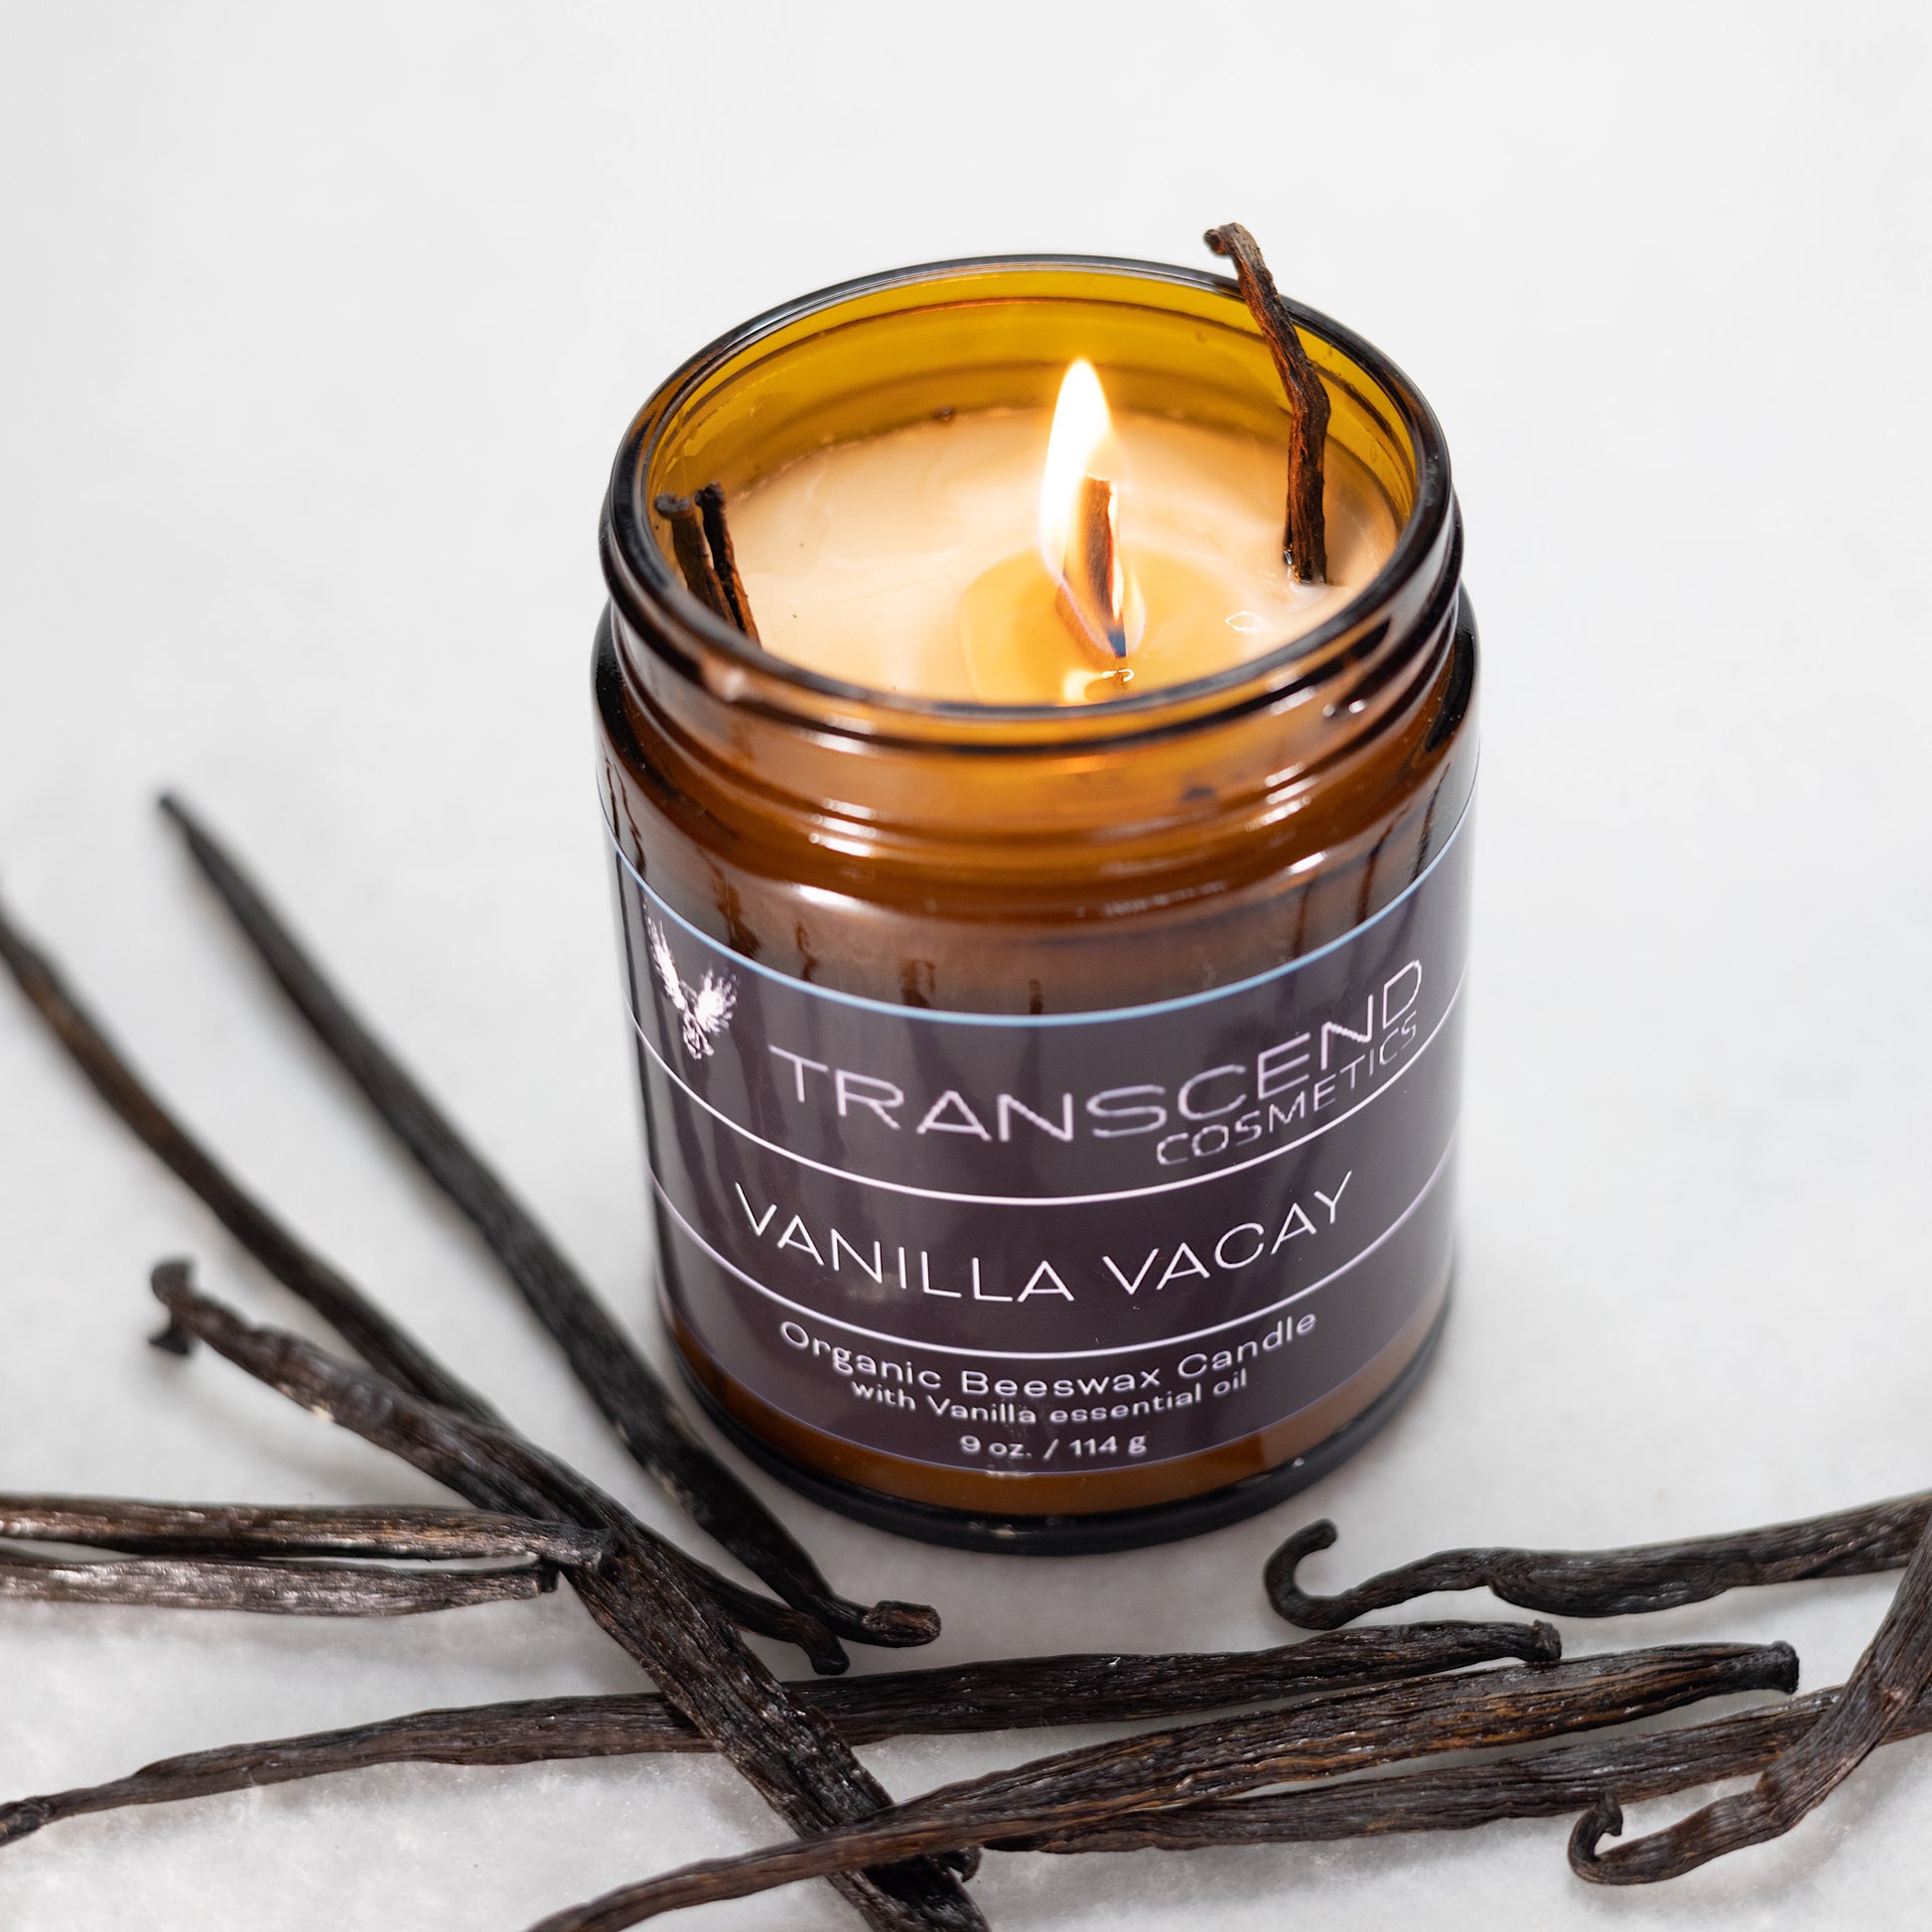 organic candle, transcend cosmetics candle, transcend cosmetics, transcend cosmetics beeswax candle,essential oil, essential oil candle, candle, beeswax candle, vanilla vacay candle, vanilla vacay beeswax candle, transcend cosmetics vanilla vacay, vanilla candle, yankee candle vanilla candle